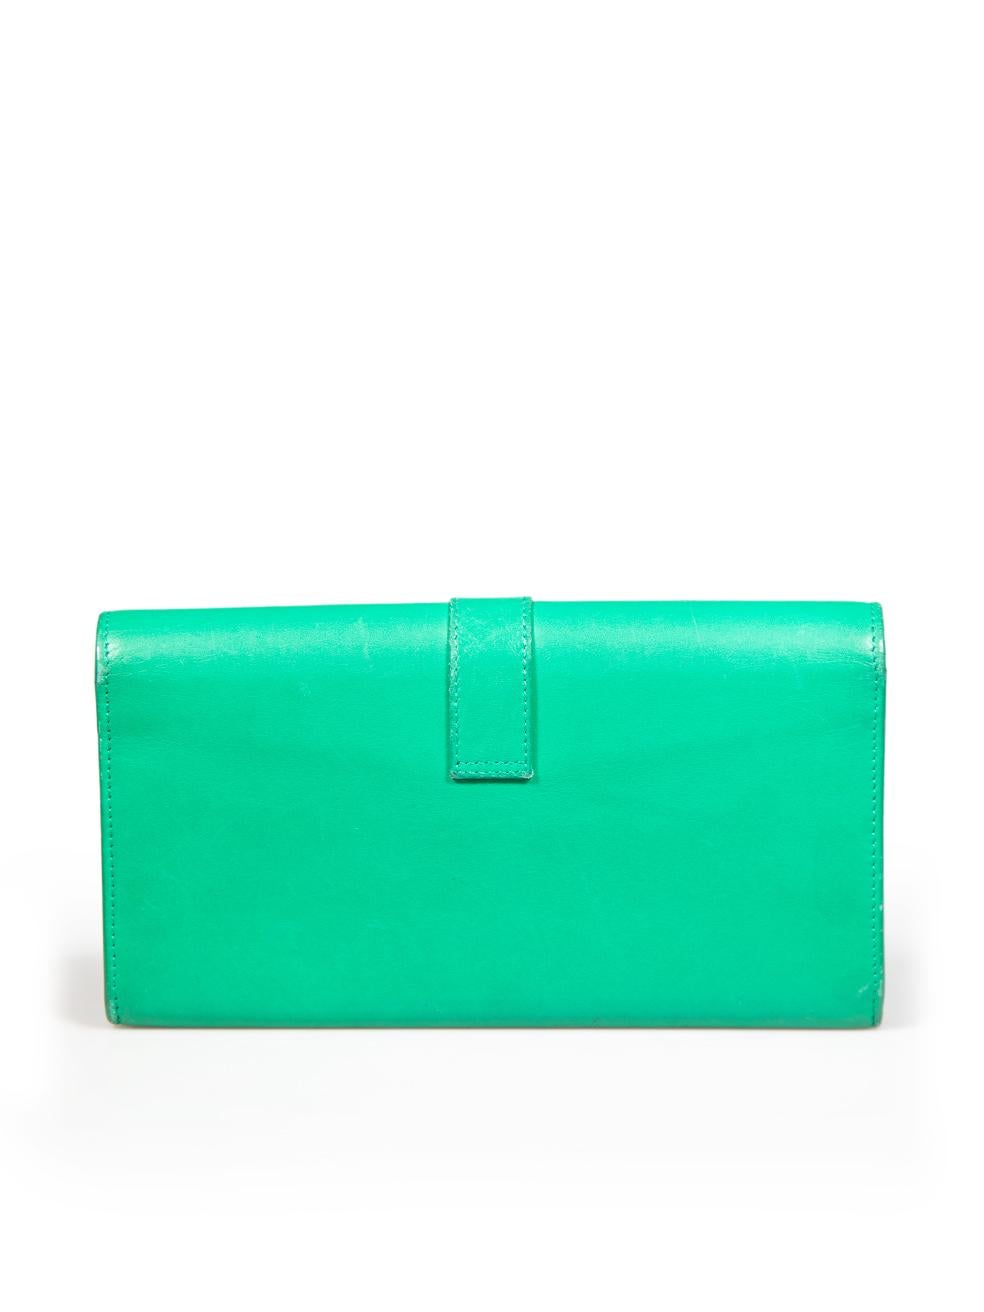 Saint Laurent Green Leather Chyc Long Wallet In Excellent Condition For Sale In London, GB